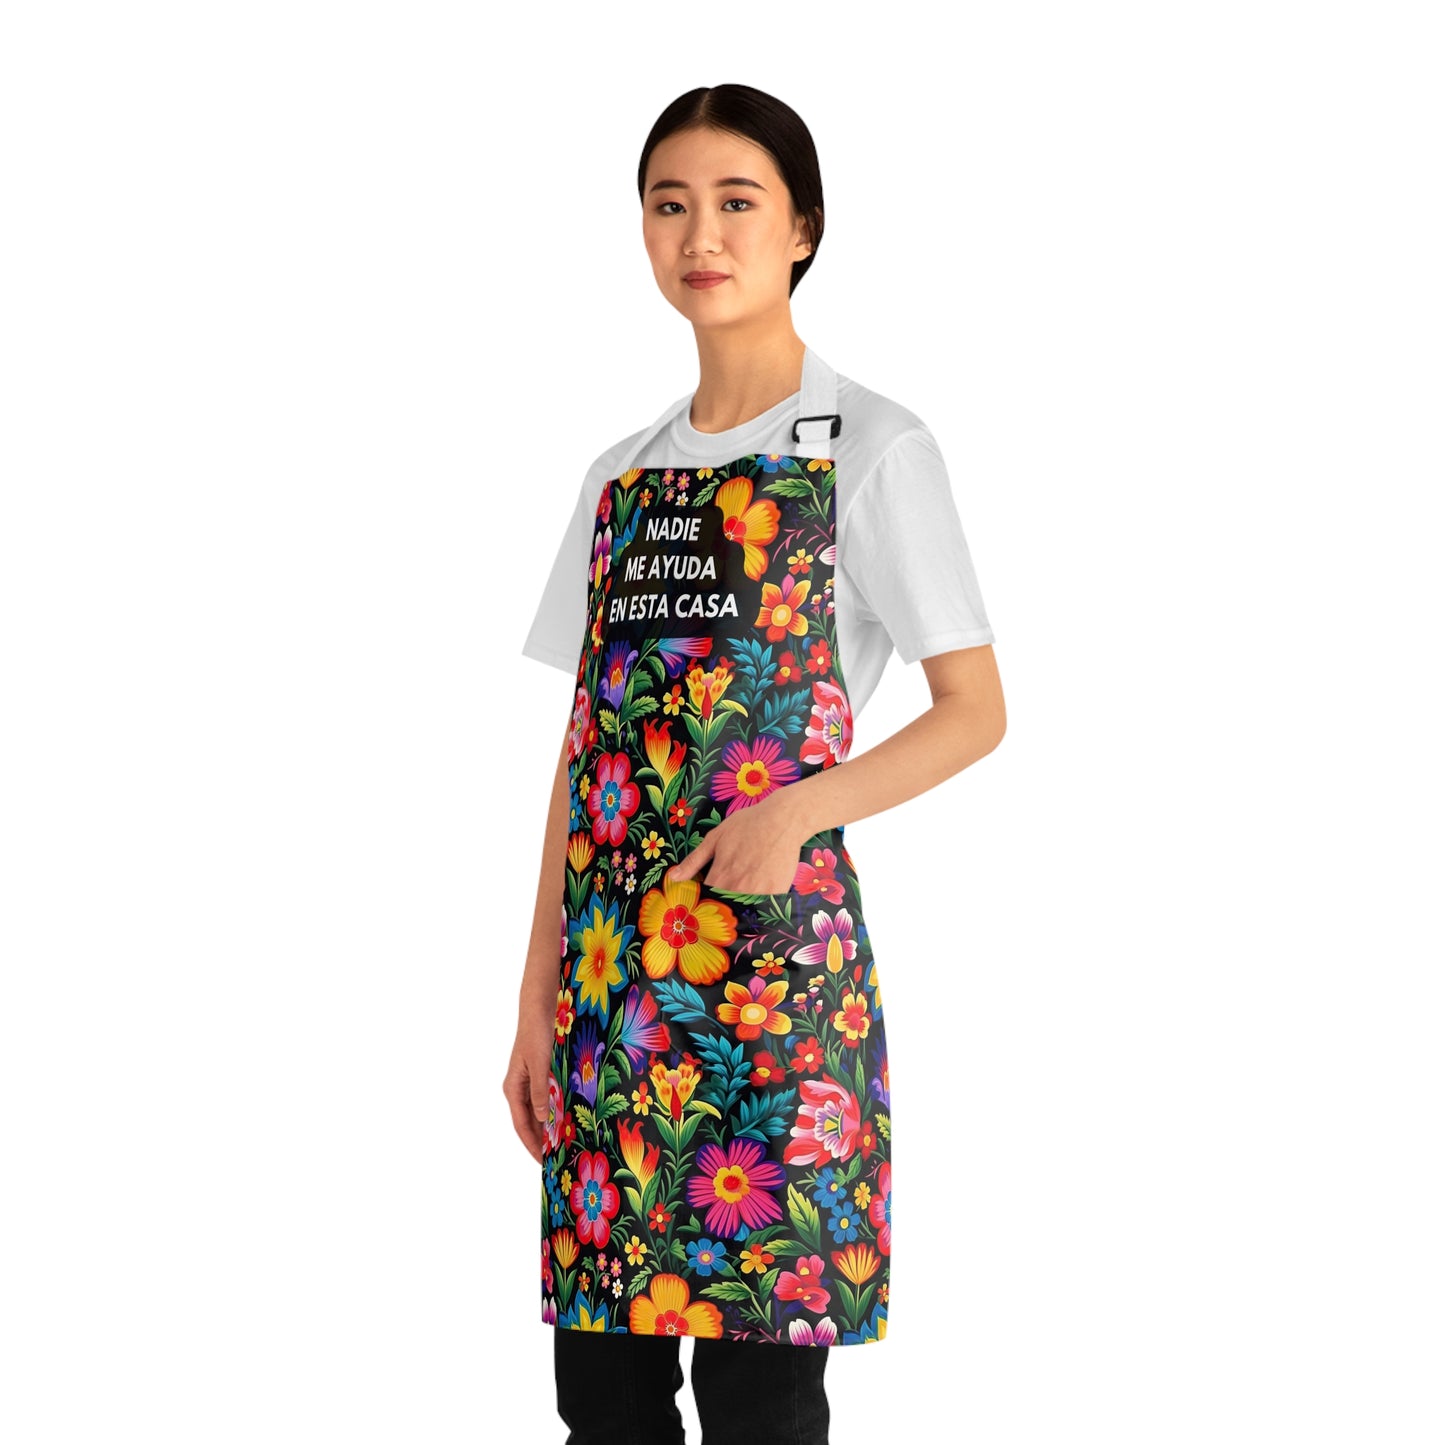 Nadie me ayuda en esta casa mandil for Mexican mom. Funny Mother’s Day gift for latin mom. Mexican Apron. Latin apron with colorful flowers.